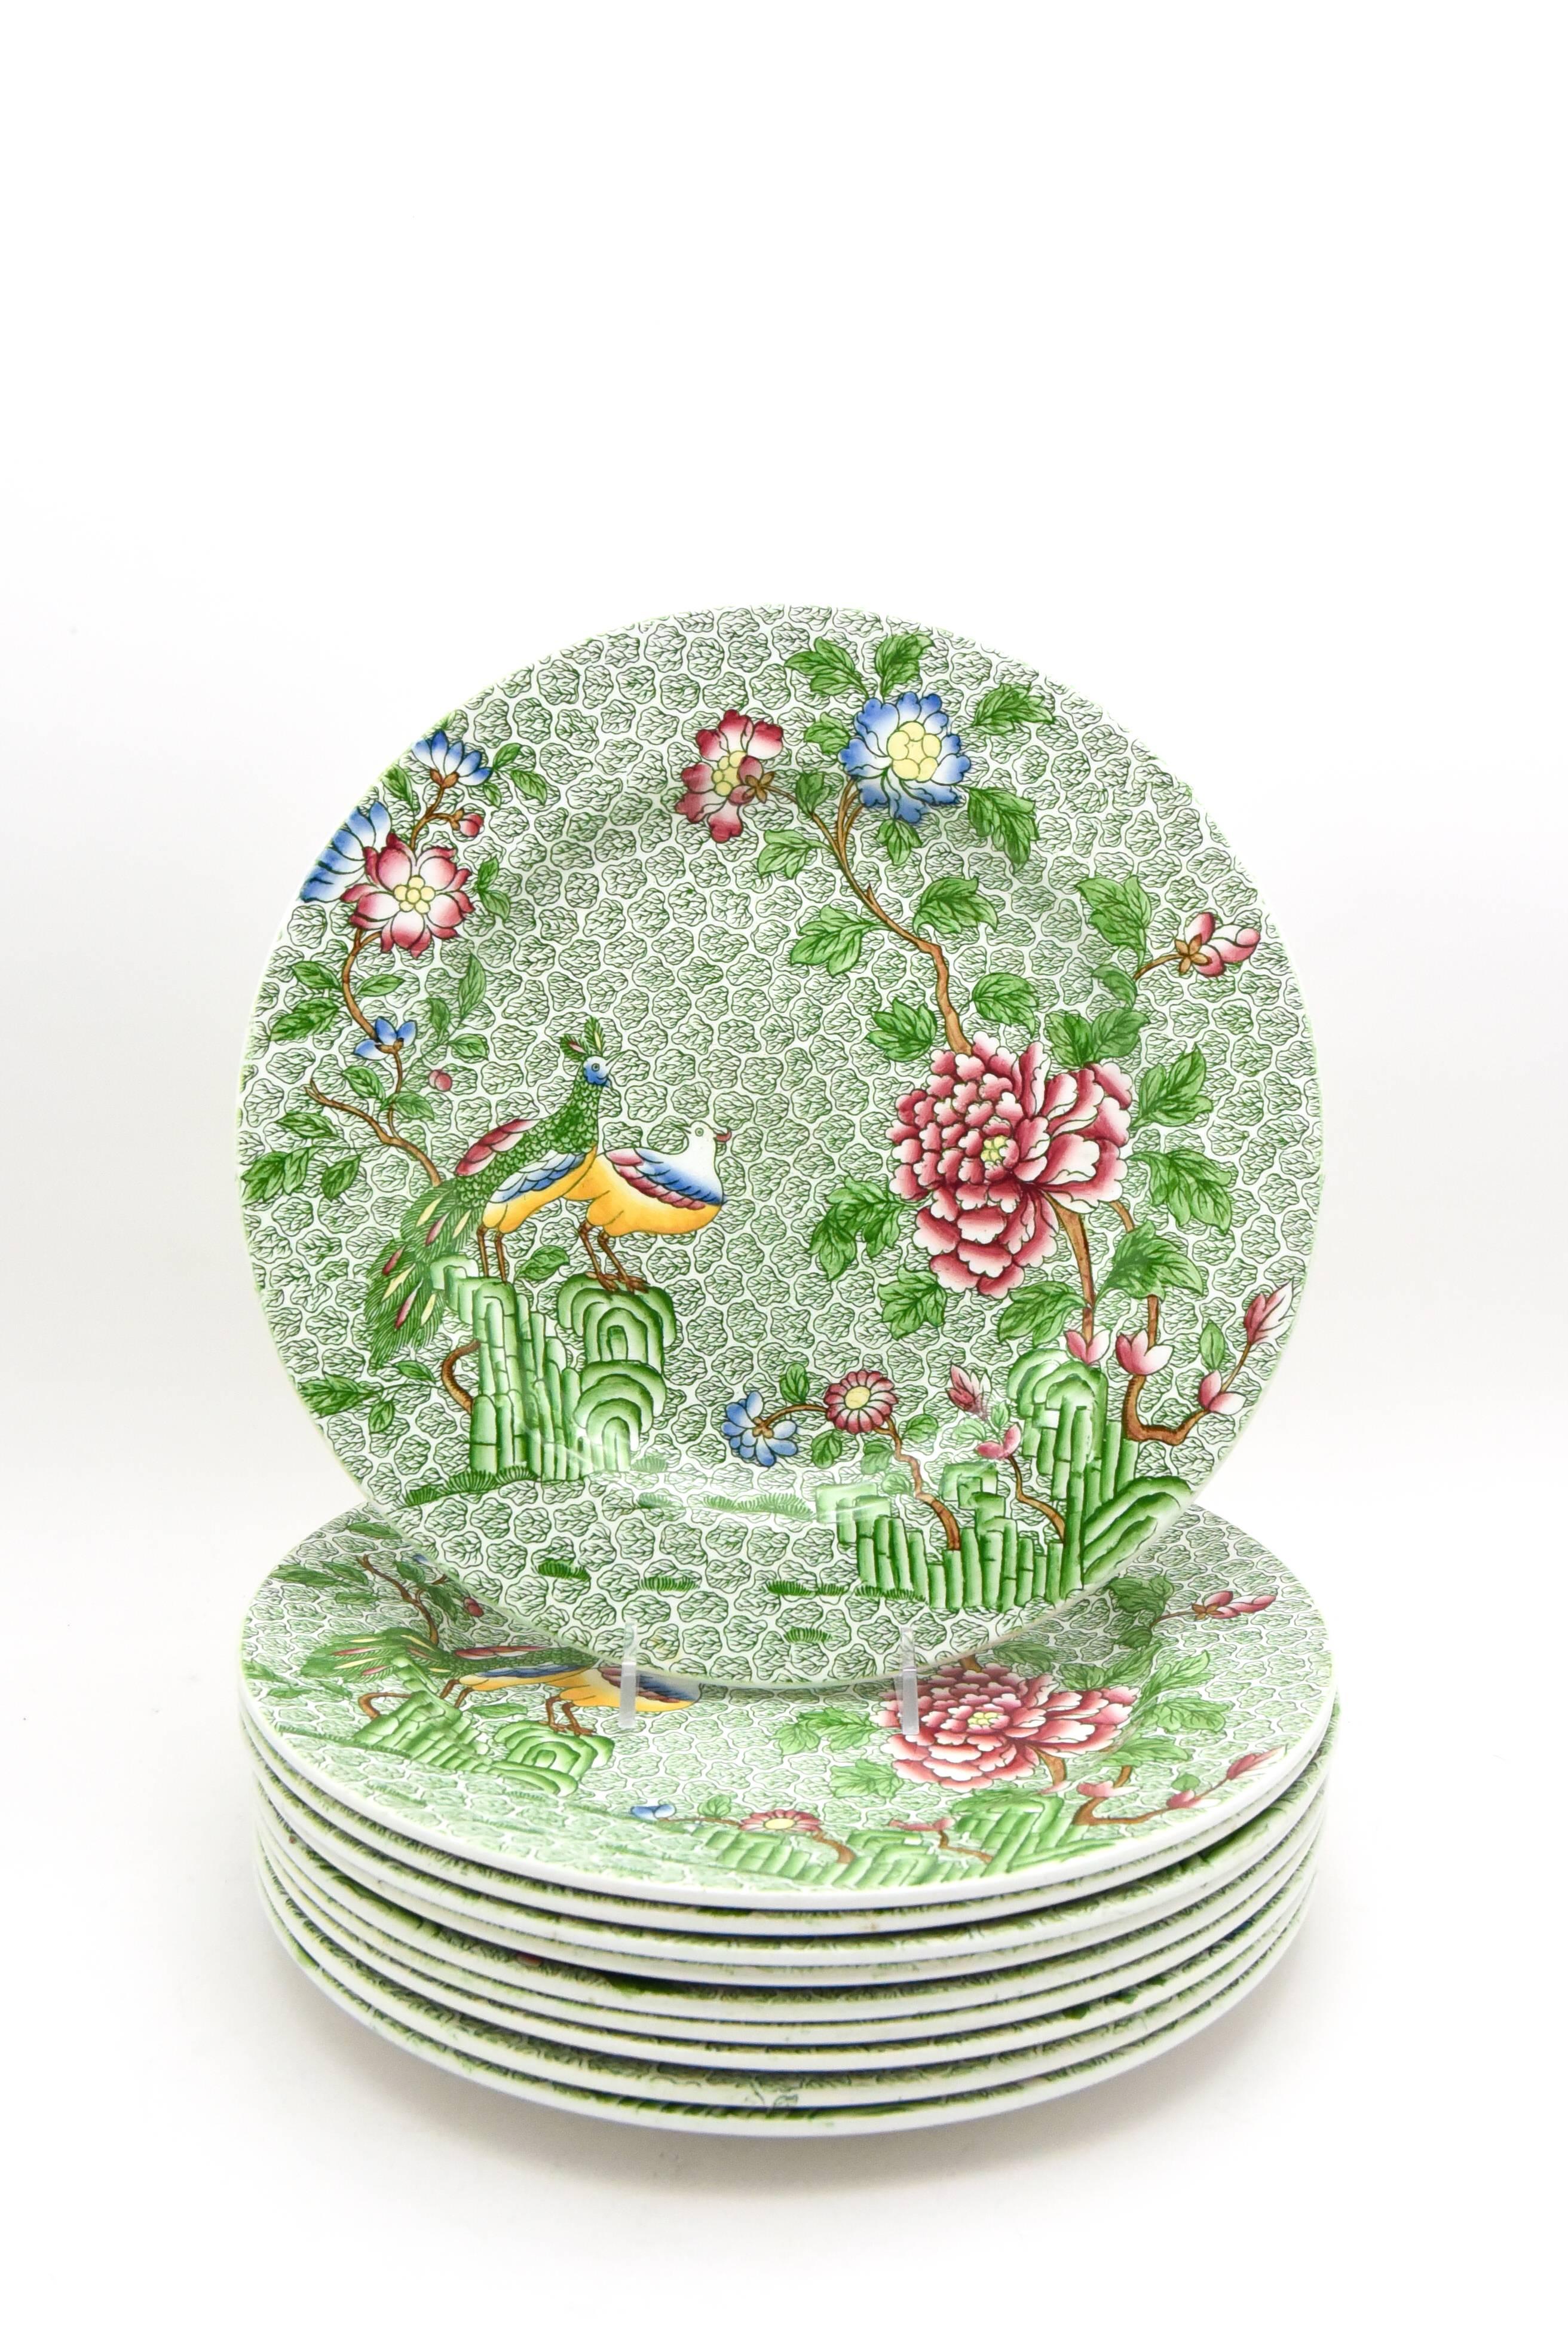 Just in time for spring, this set of ten Copeland late Spode dinner plates are sure to delight. The vibrant apple green all-over ground is decorated with two fanciful birds perched on a branch and the garden overflows with brightly colored